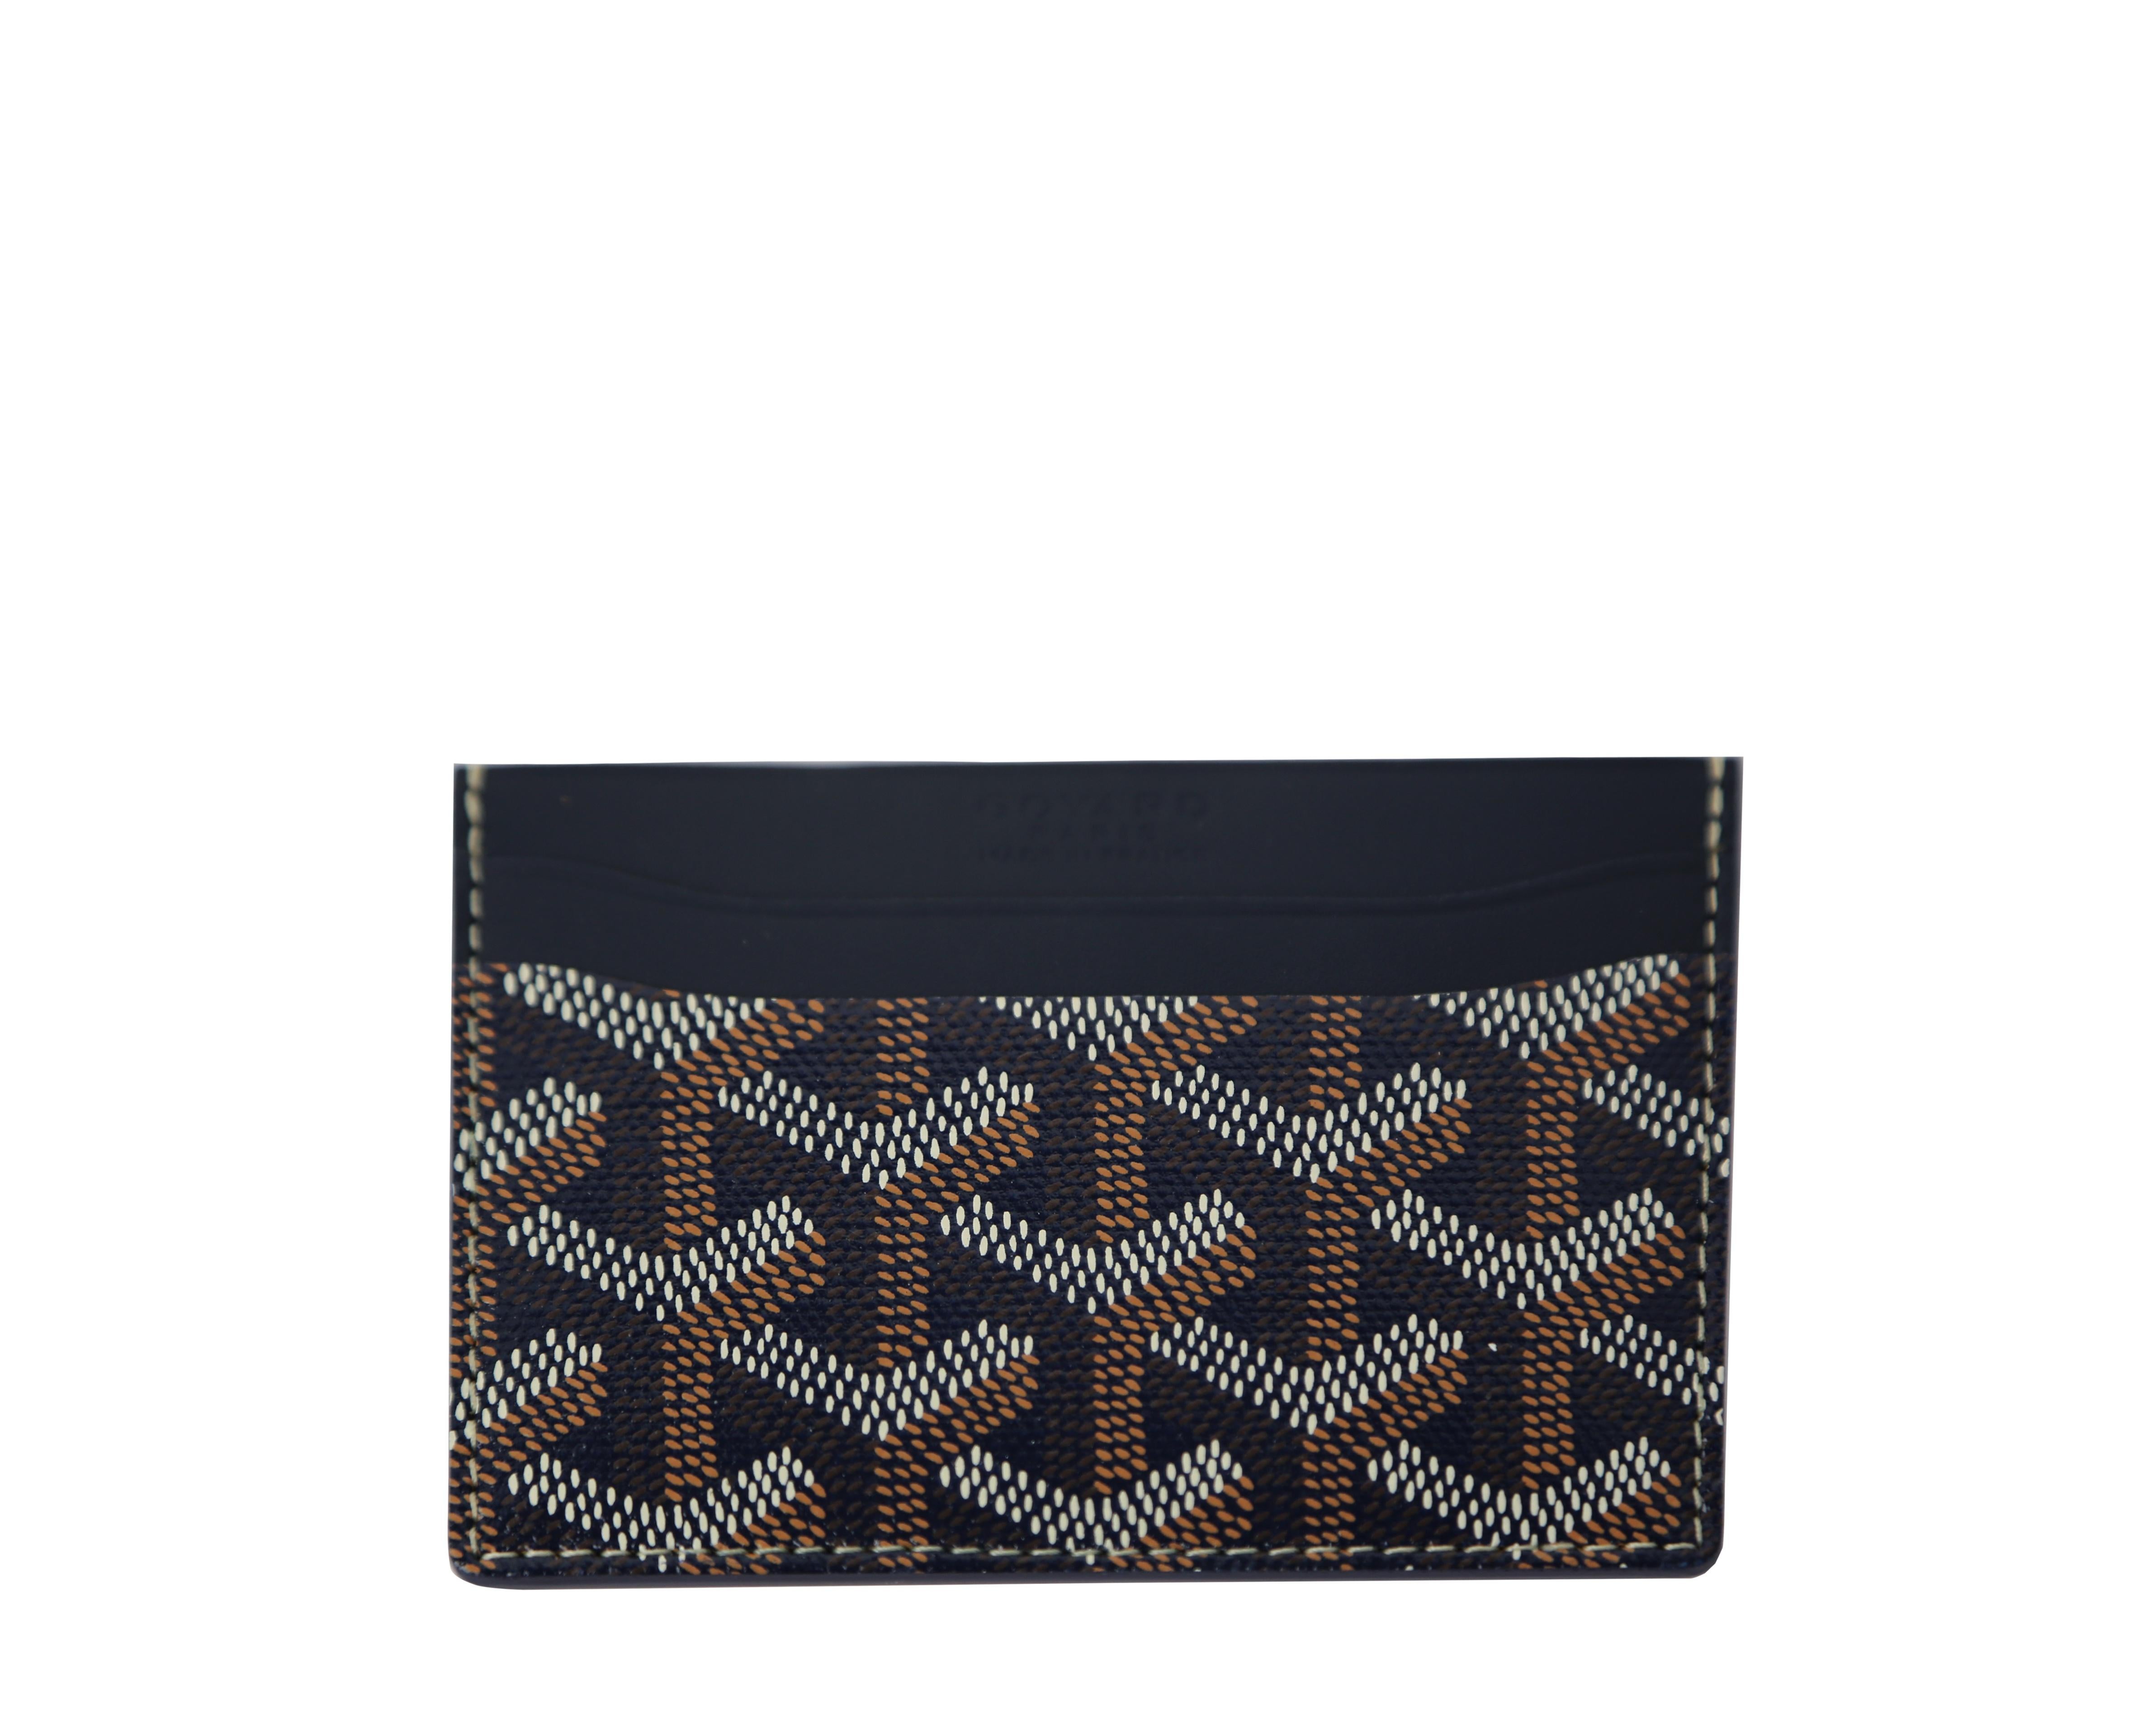 Crafted from canvas and leather, this customised Scrooge McDuck Saint Suplice wallet features Goyard's signature monogram print. Perfect for organising cards, it has 4 card pockets and a central pocket with a yellow interior. And a hand-painted